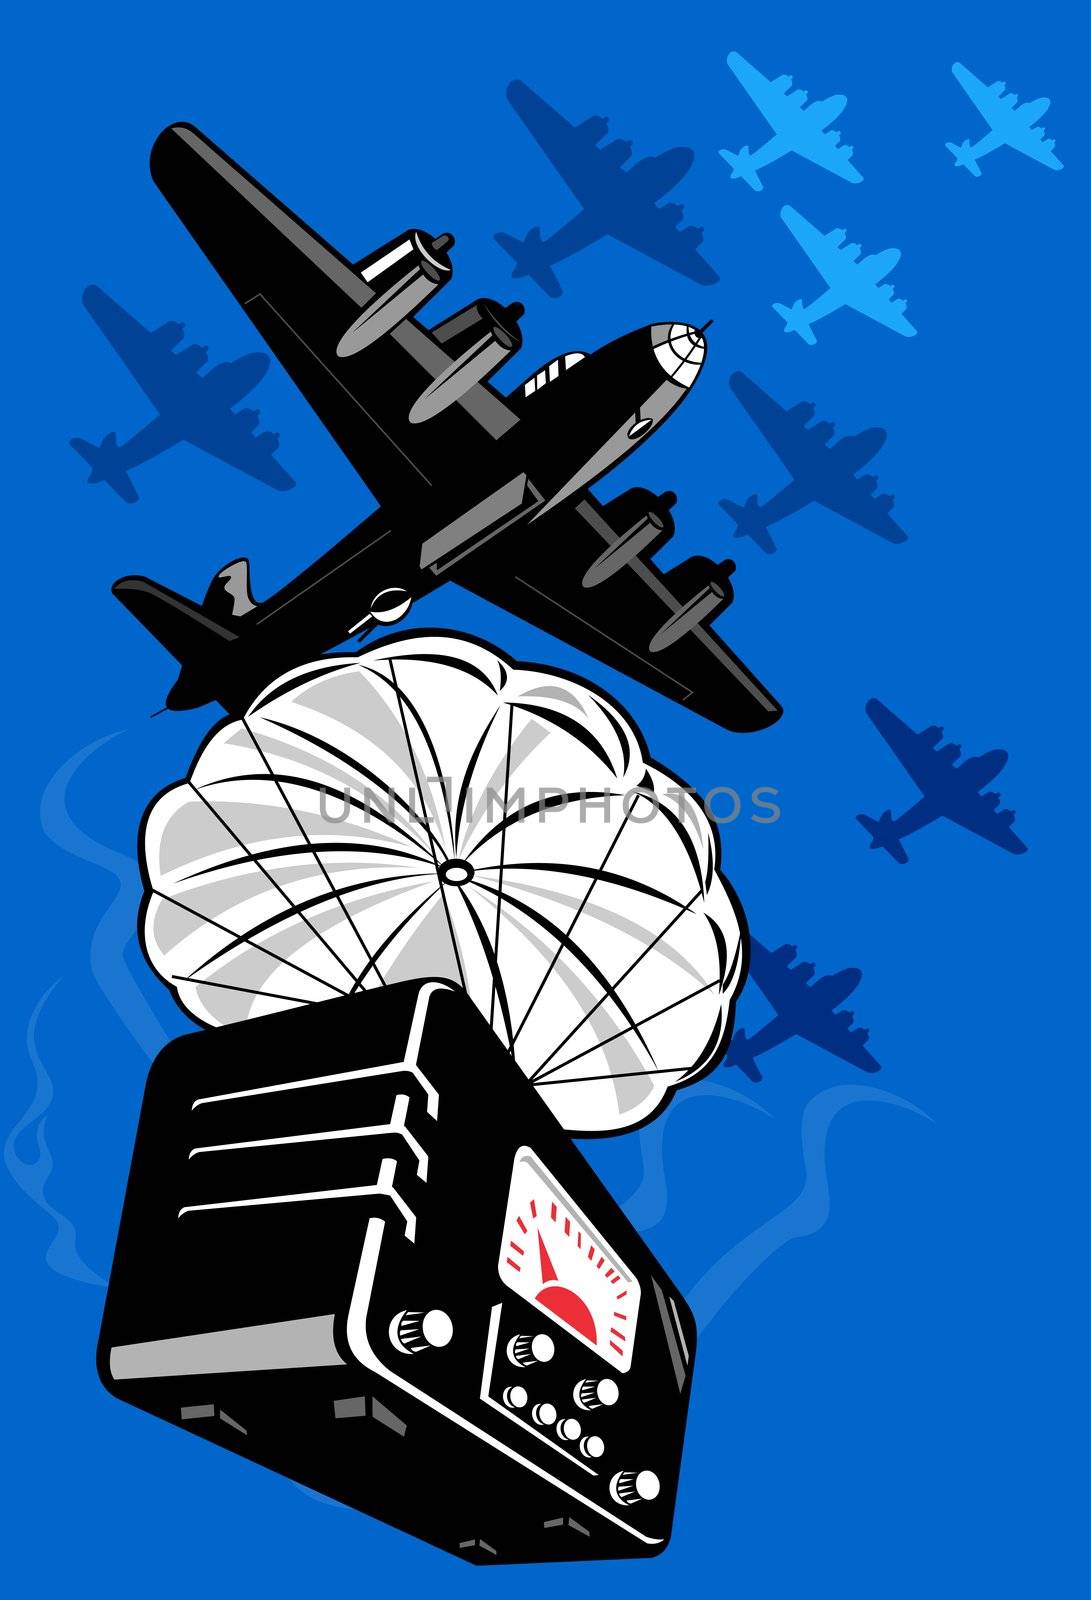 illustration of a world war two bomber dropping vintage radio on parachute done in retro style